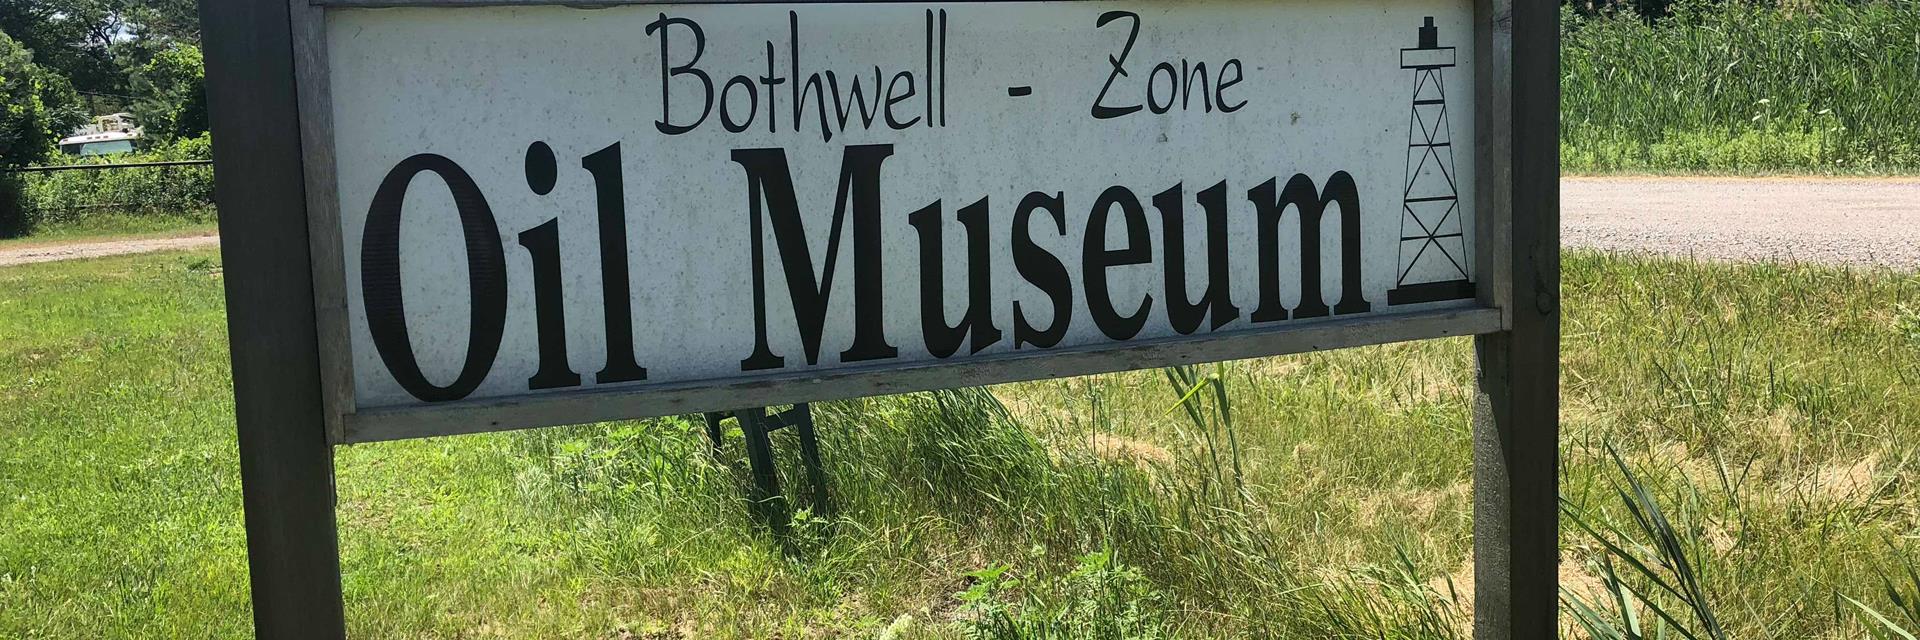 sign for the bothwell zone oil museum 